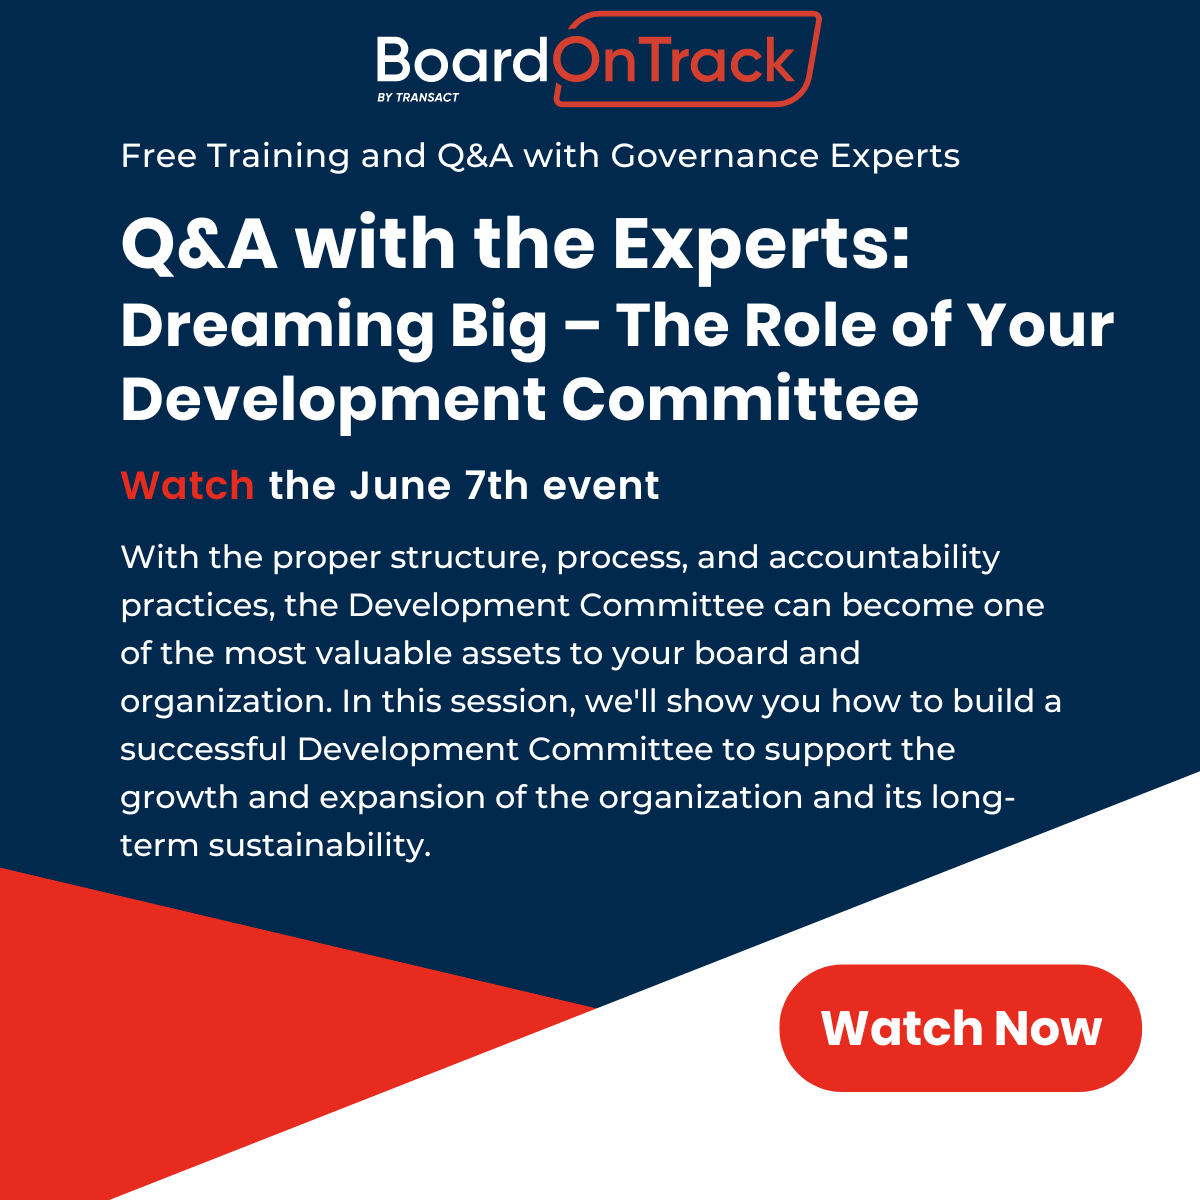 Dreaming Big – The Role of Your Development Committee 